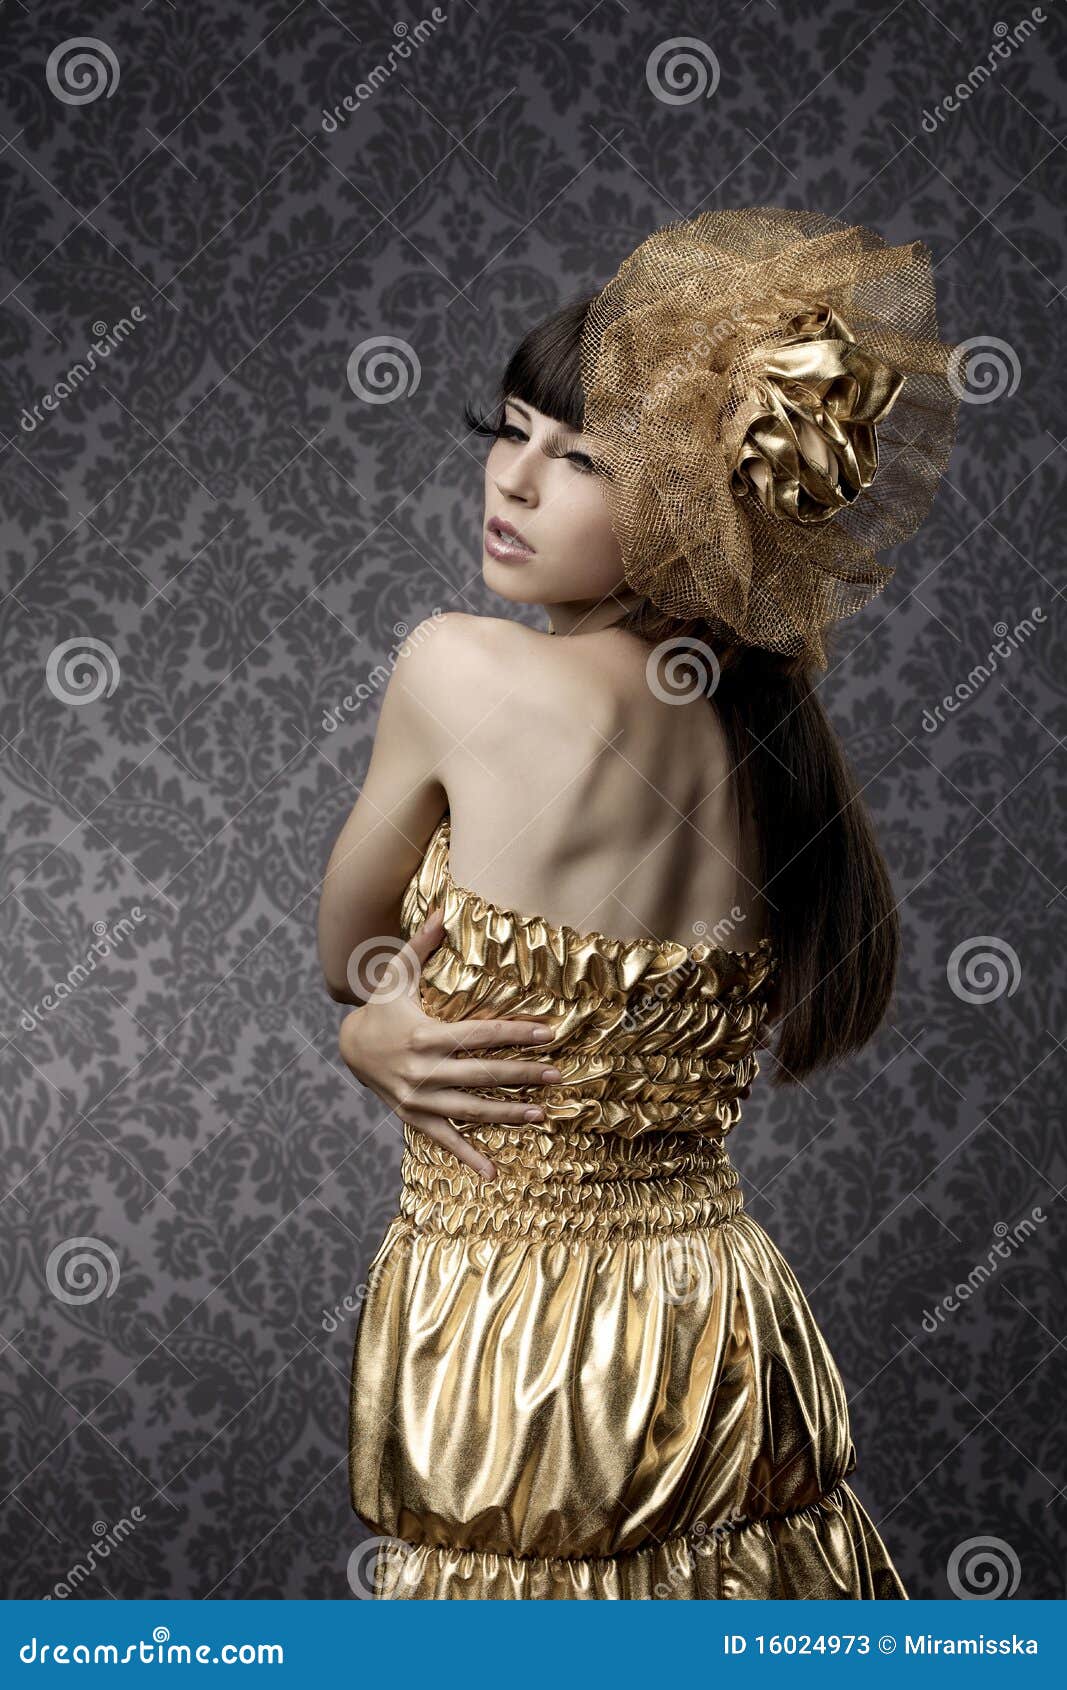 luxurious glamorous models in gold